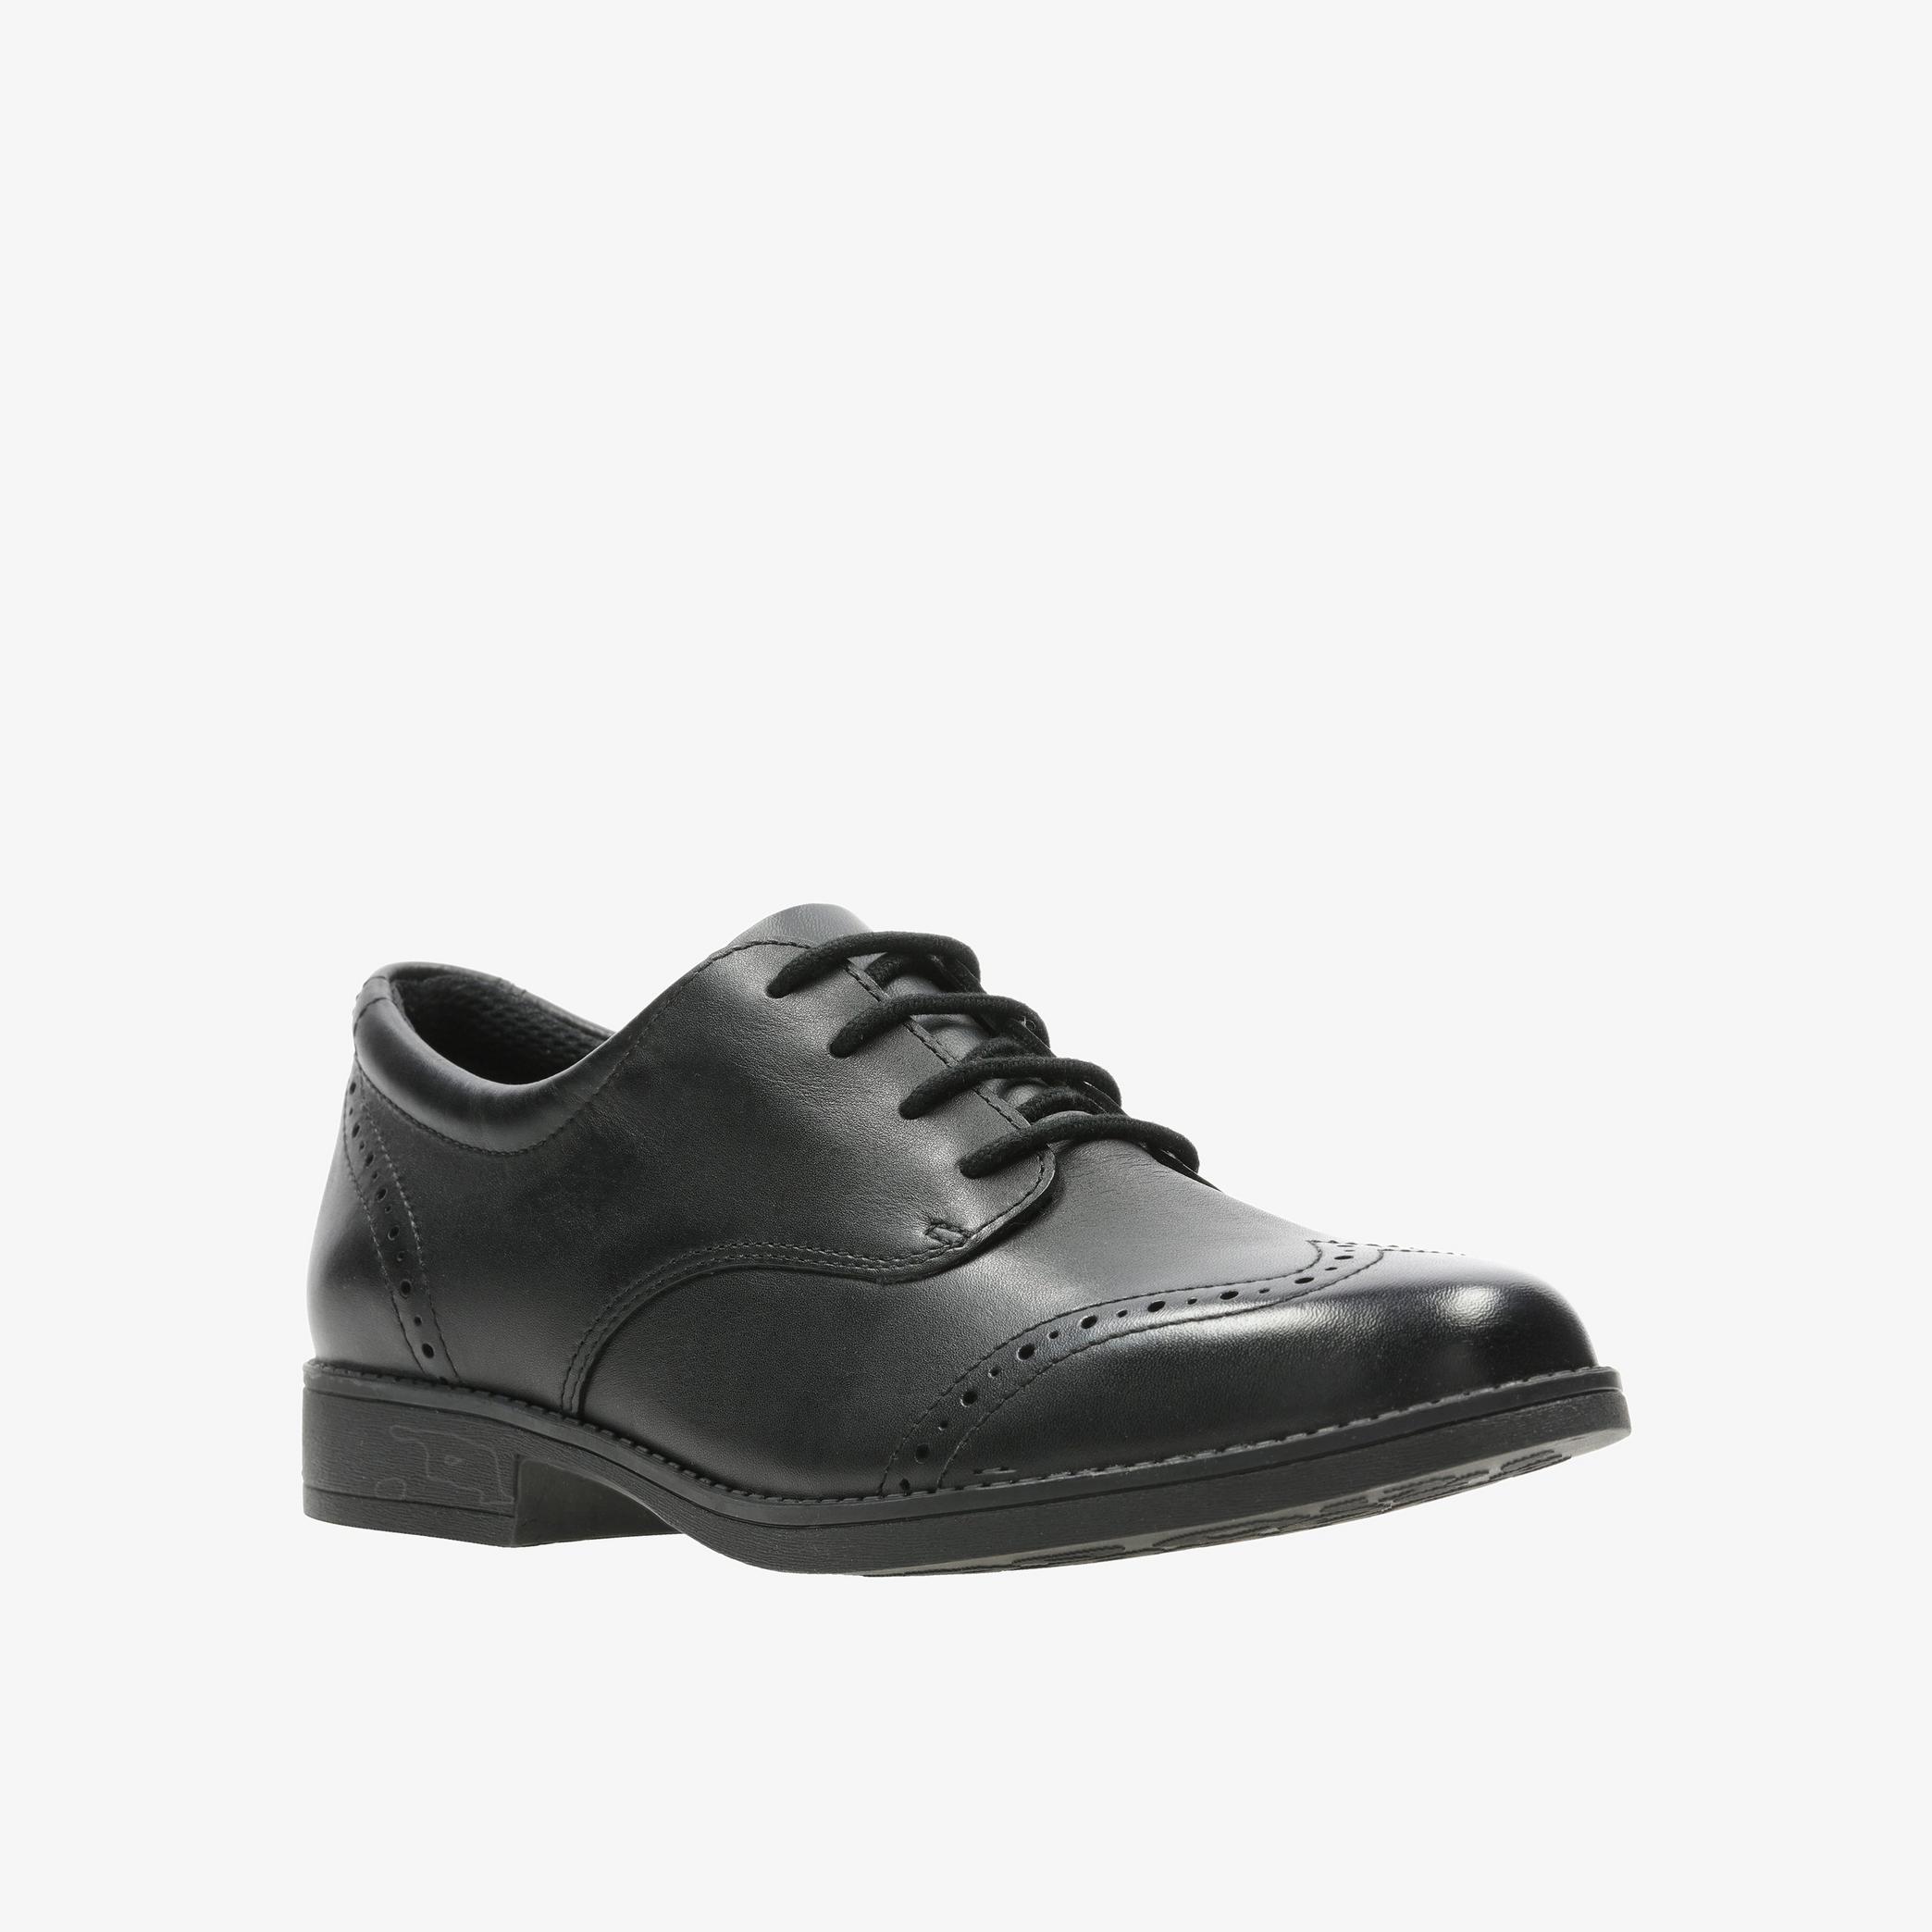 Sami Walk Youth Black Leather Brogues, view 3 of 6